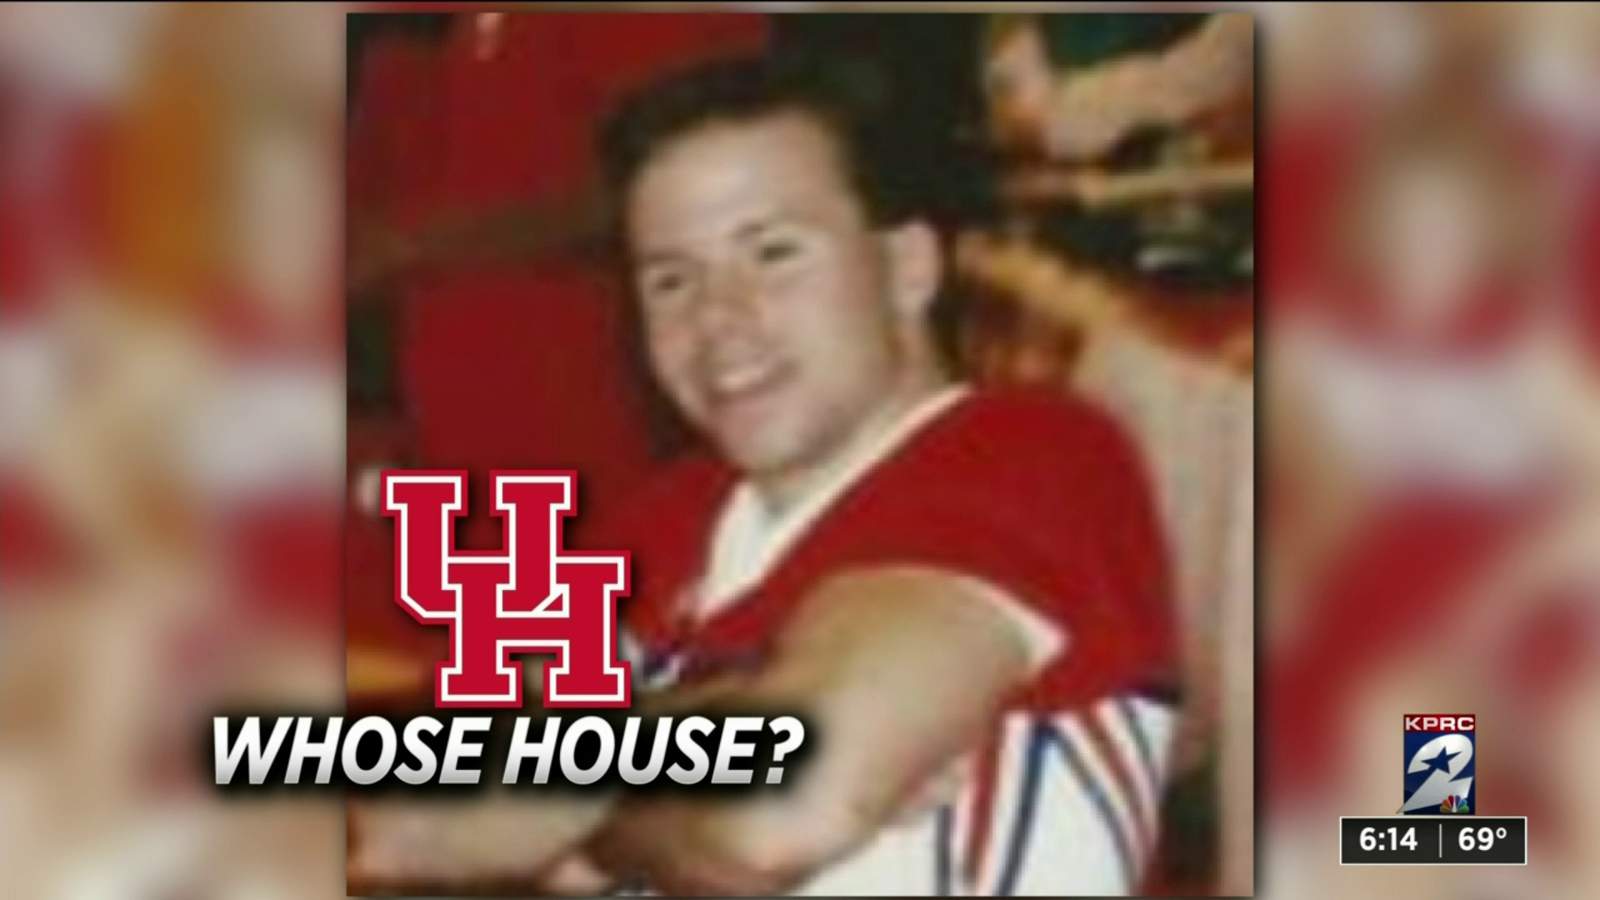 Ever wonder where the University of Houston ‘Whose House’ chant came from? UH says it was started in the late 80s